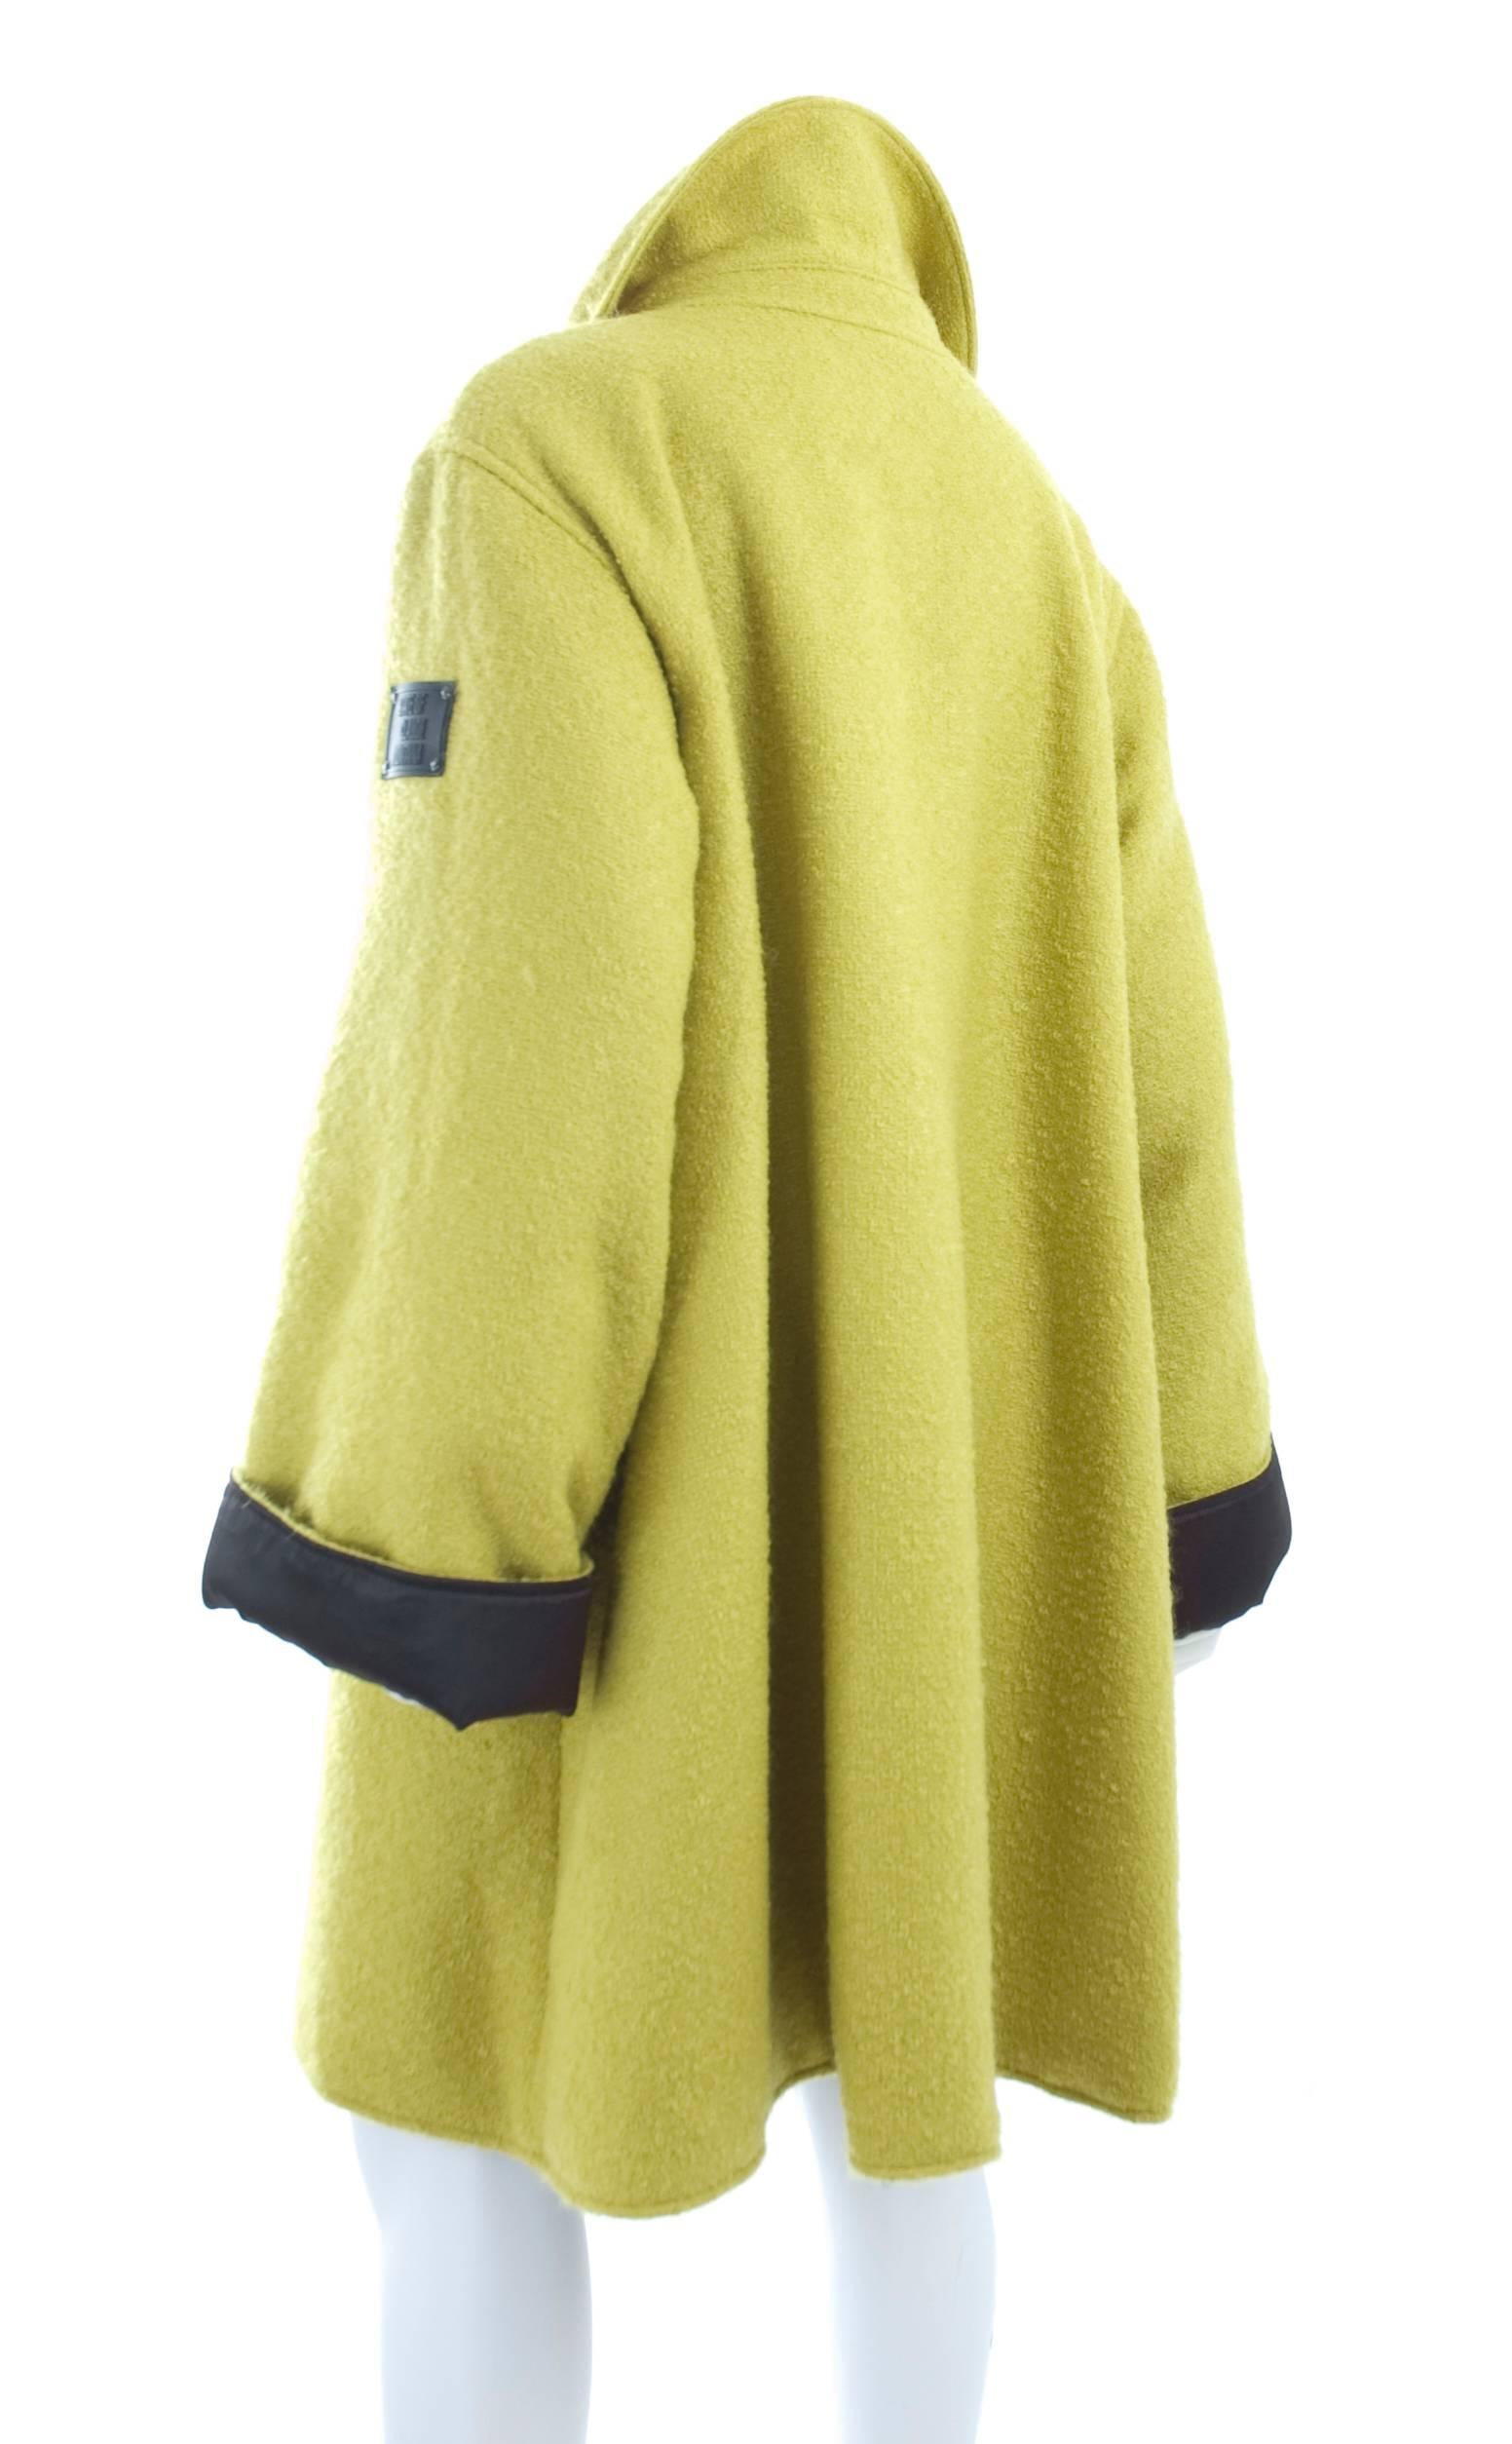 Vintage 80s State Of Claude Montana Coat in lime-green and black satin trim and lining.
Snap closure.
Excellent condition - no flaws to mention.
45% Mohair 40% Wool 15% Polyamid
Size 46 FR and 12 US
Measurements:
Length 38